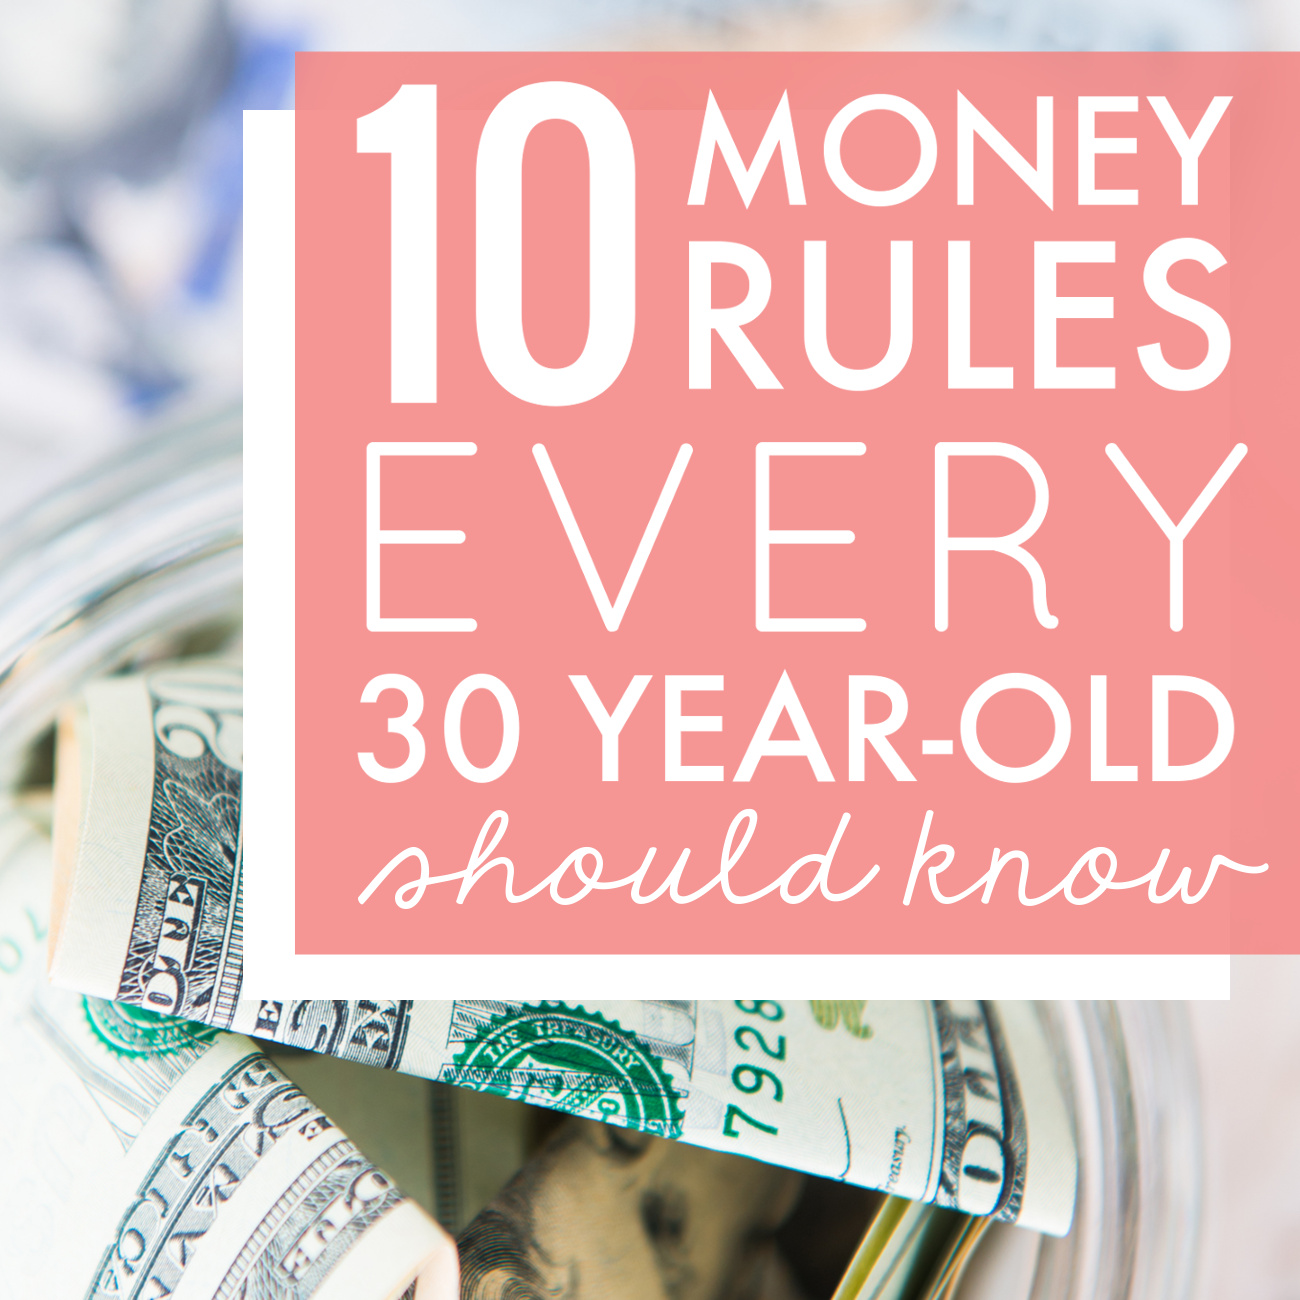 10 Money Rules Every 30 Year-Old Should Know